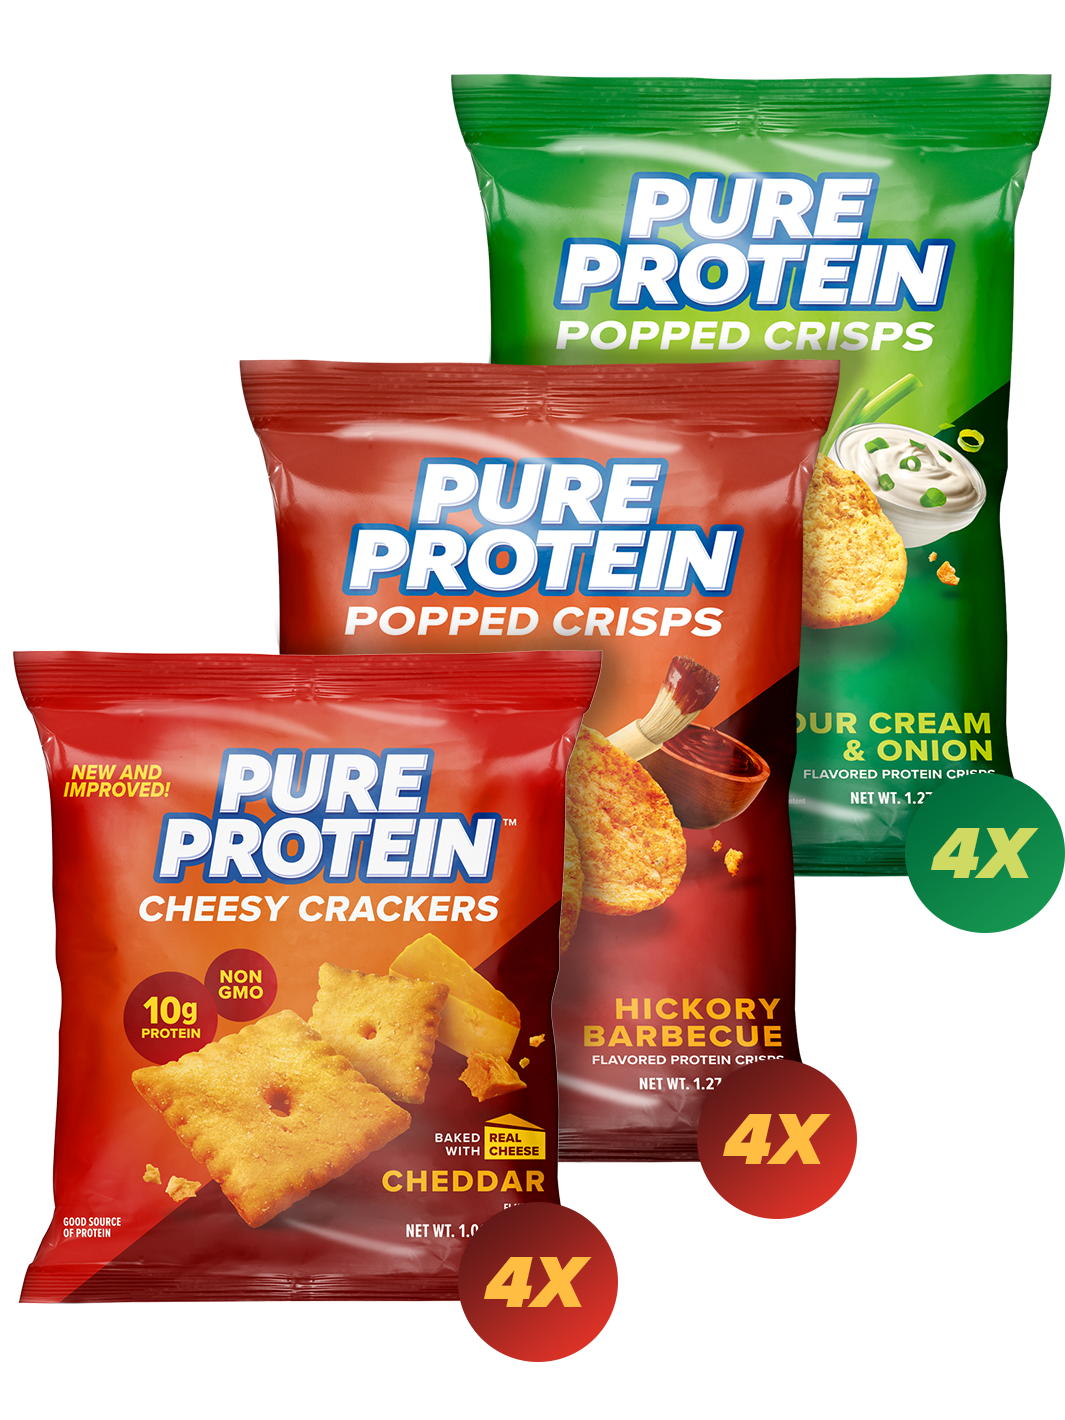 Pure Protein Snack Pack - Contains: 4 Cheesy Cheddar Cracker, 4 Sour Cream & Onion Popped Crisps 1.27 oz. bag, 4 Hickory Barbecue Popped Crisps 1.27 oz. bag